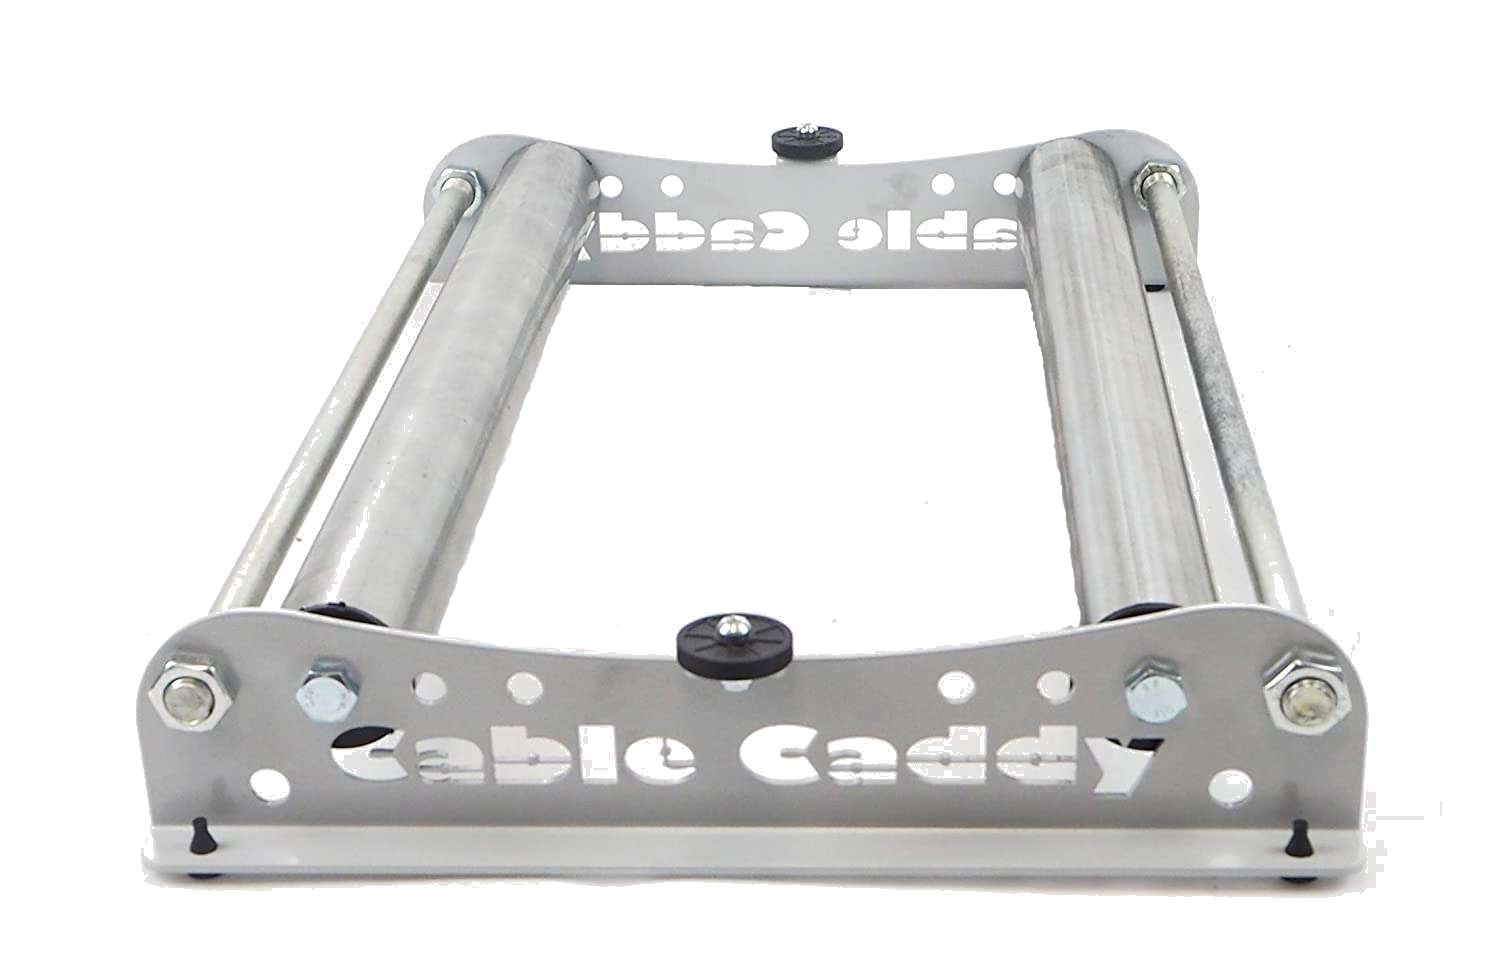 Cable Caddy Twin 3in1 Roller For Comercial/Industrial rolls